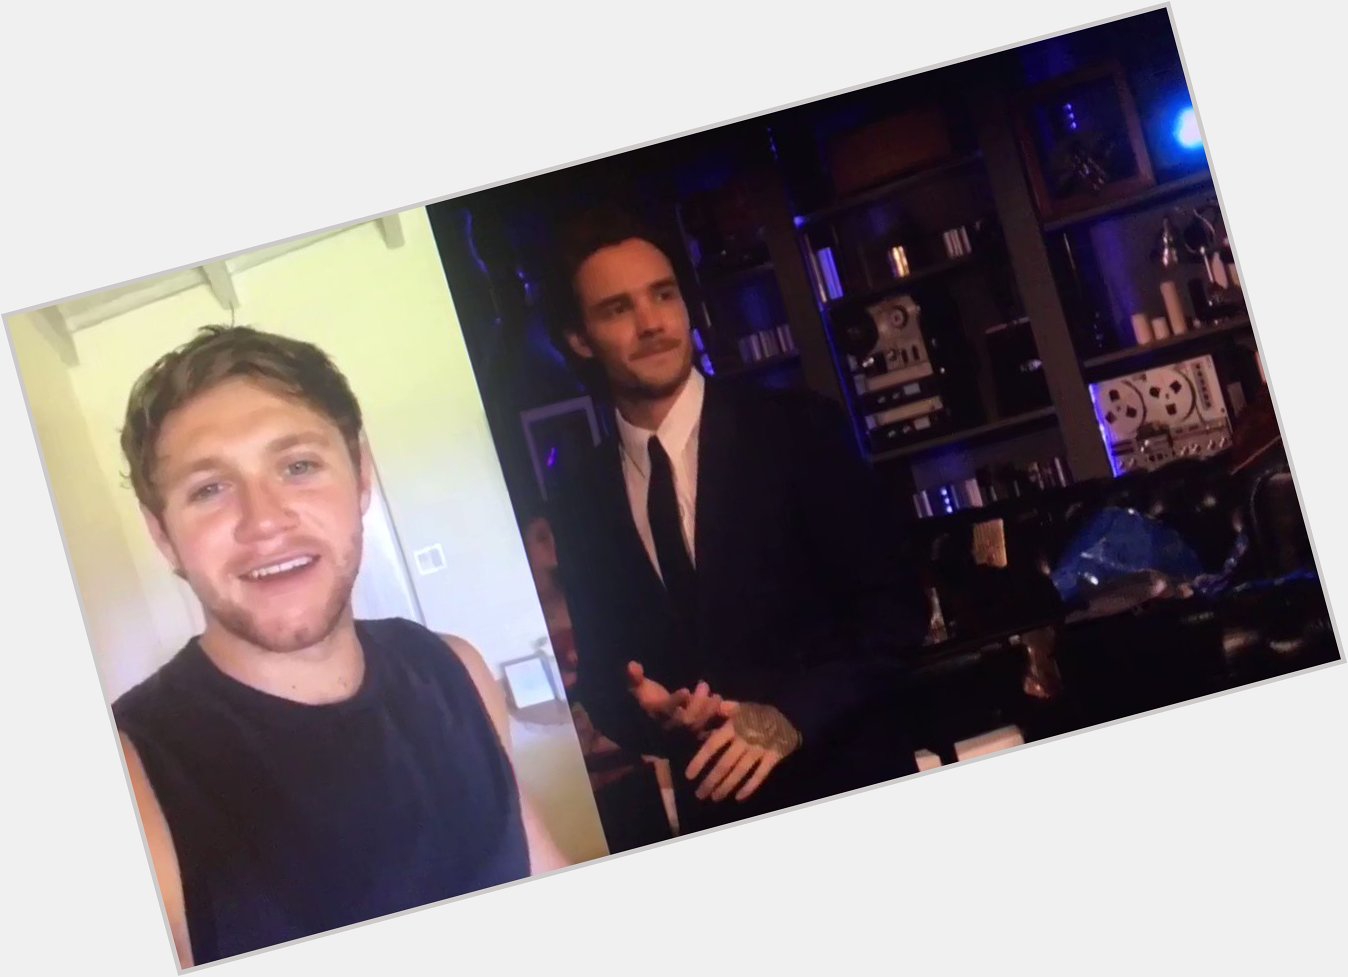 Niall greeting Liam Payne a happy birthday on Liam s virtual concert today. August 29, 2020 